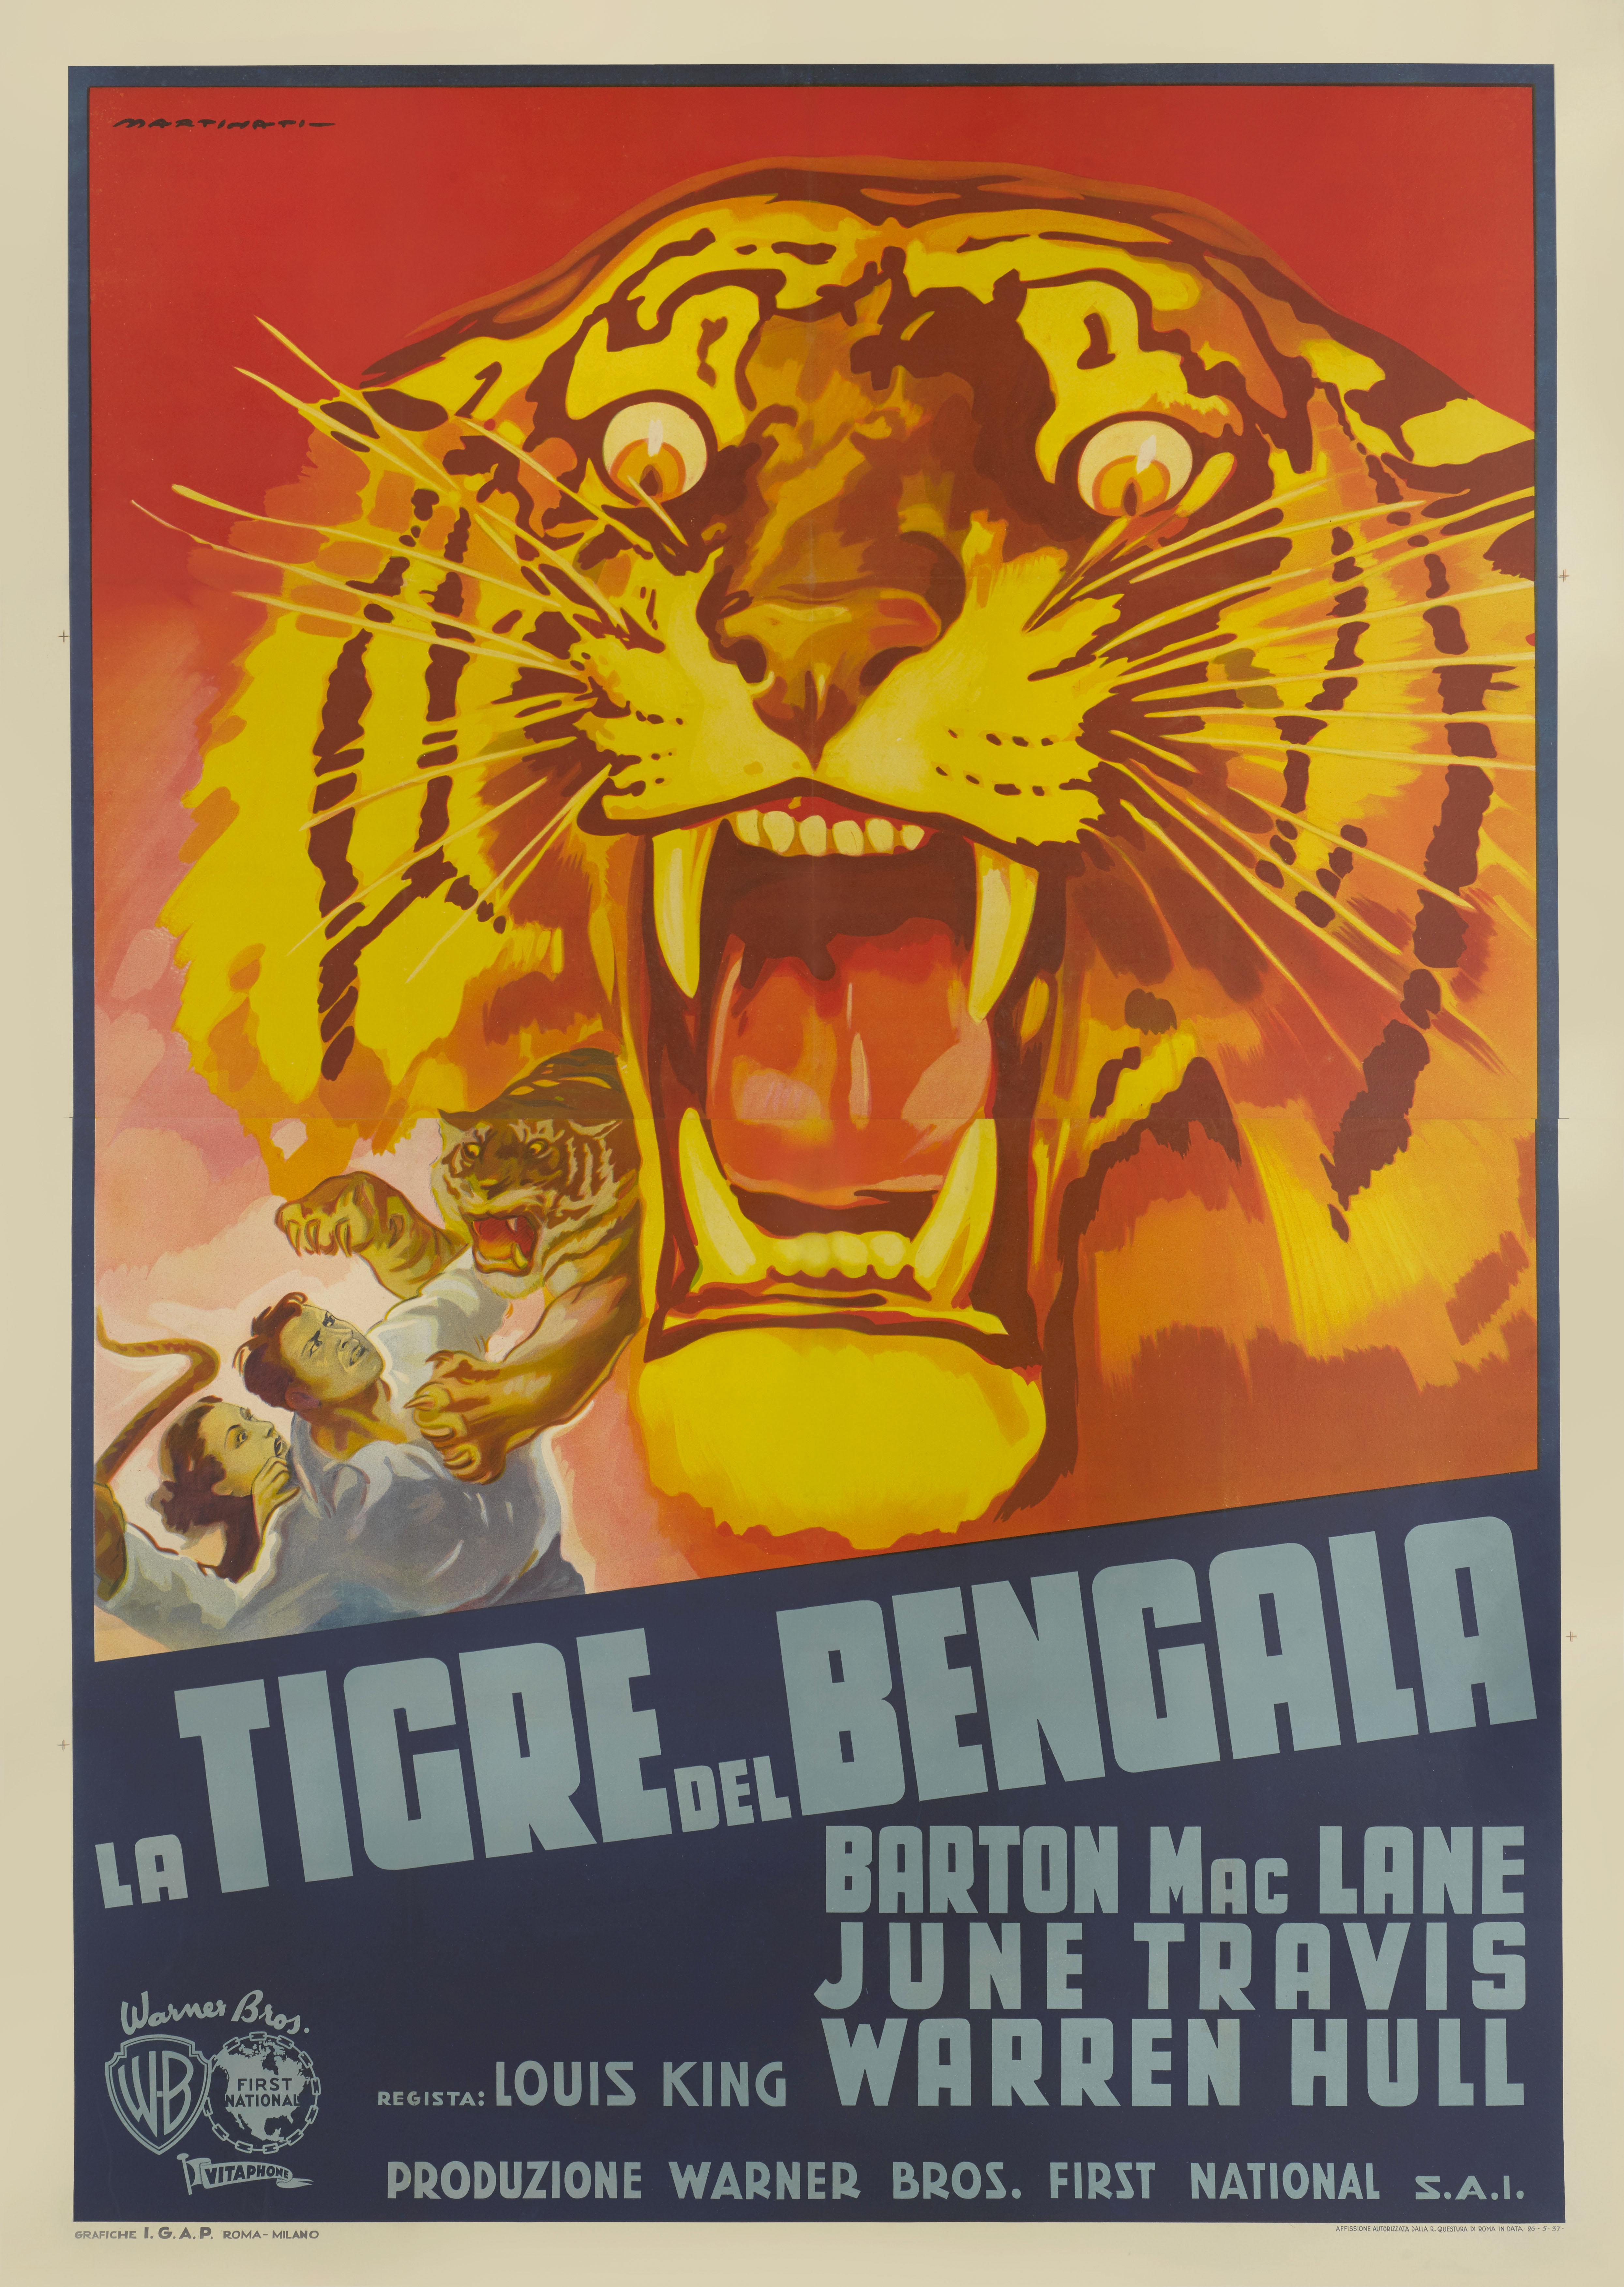 Original Italian film poster for the 1936 action adventure film Bengal Tiger.
This 1936 film was directed by Louis King. The cast includes Barton MacLane, June Travis and Warren Hull. It tells the story of a circus animal trainer, who has a